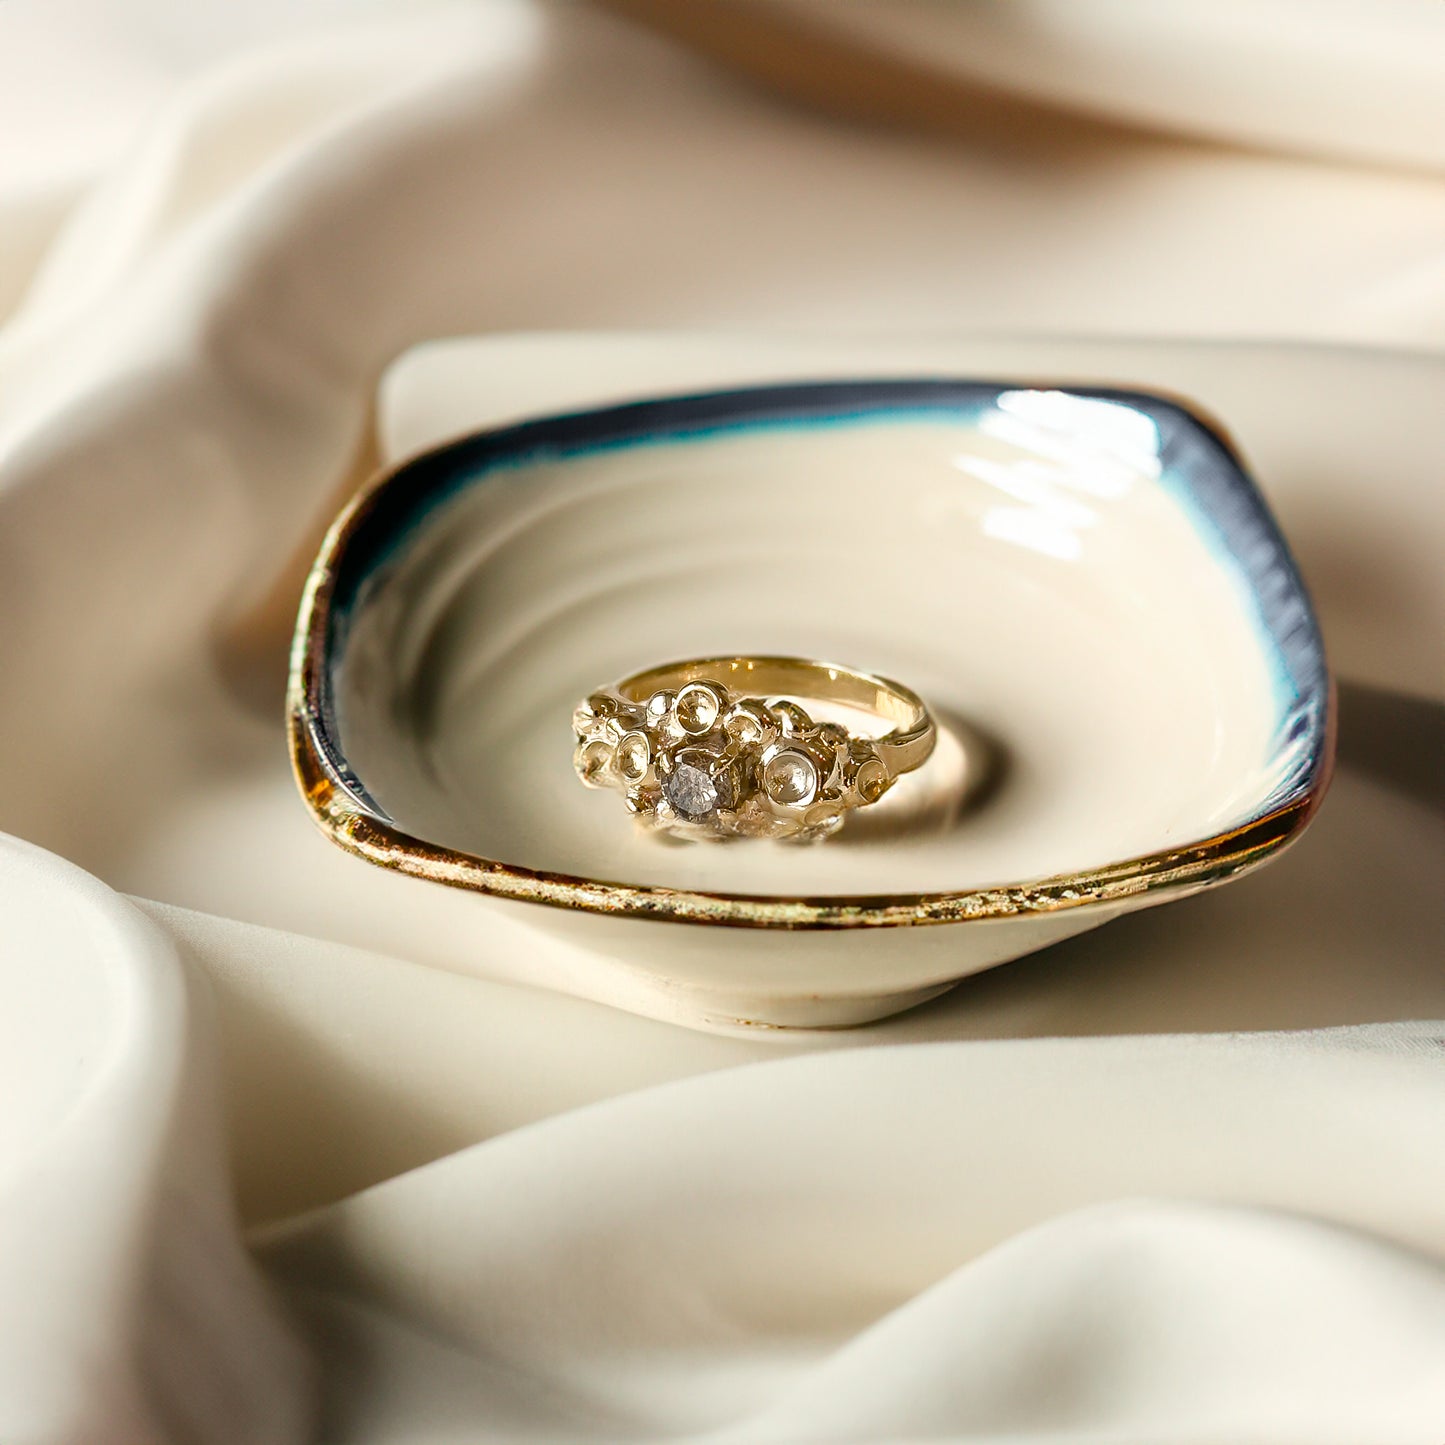 Barnacle Gold Ring with Salt and Pepper Diamond